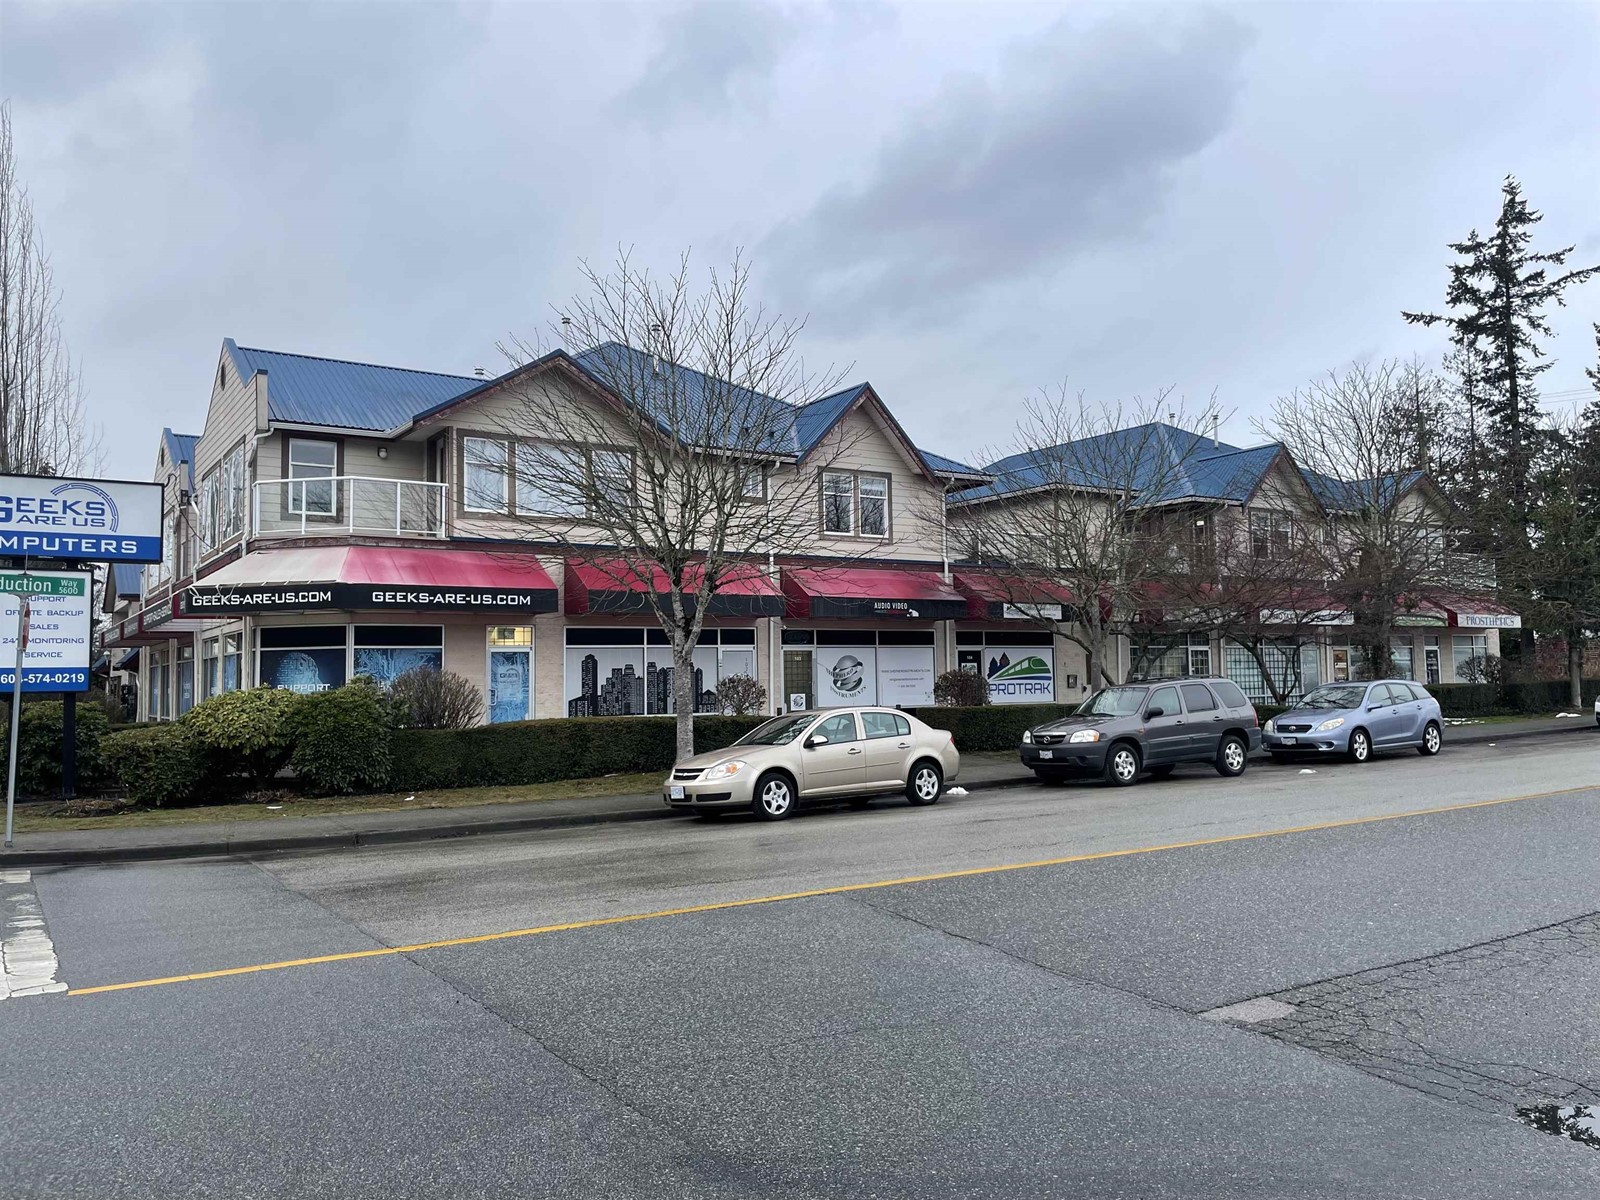 1240-605 Robson Street  William Wright Commercial Real Estate Services